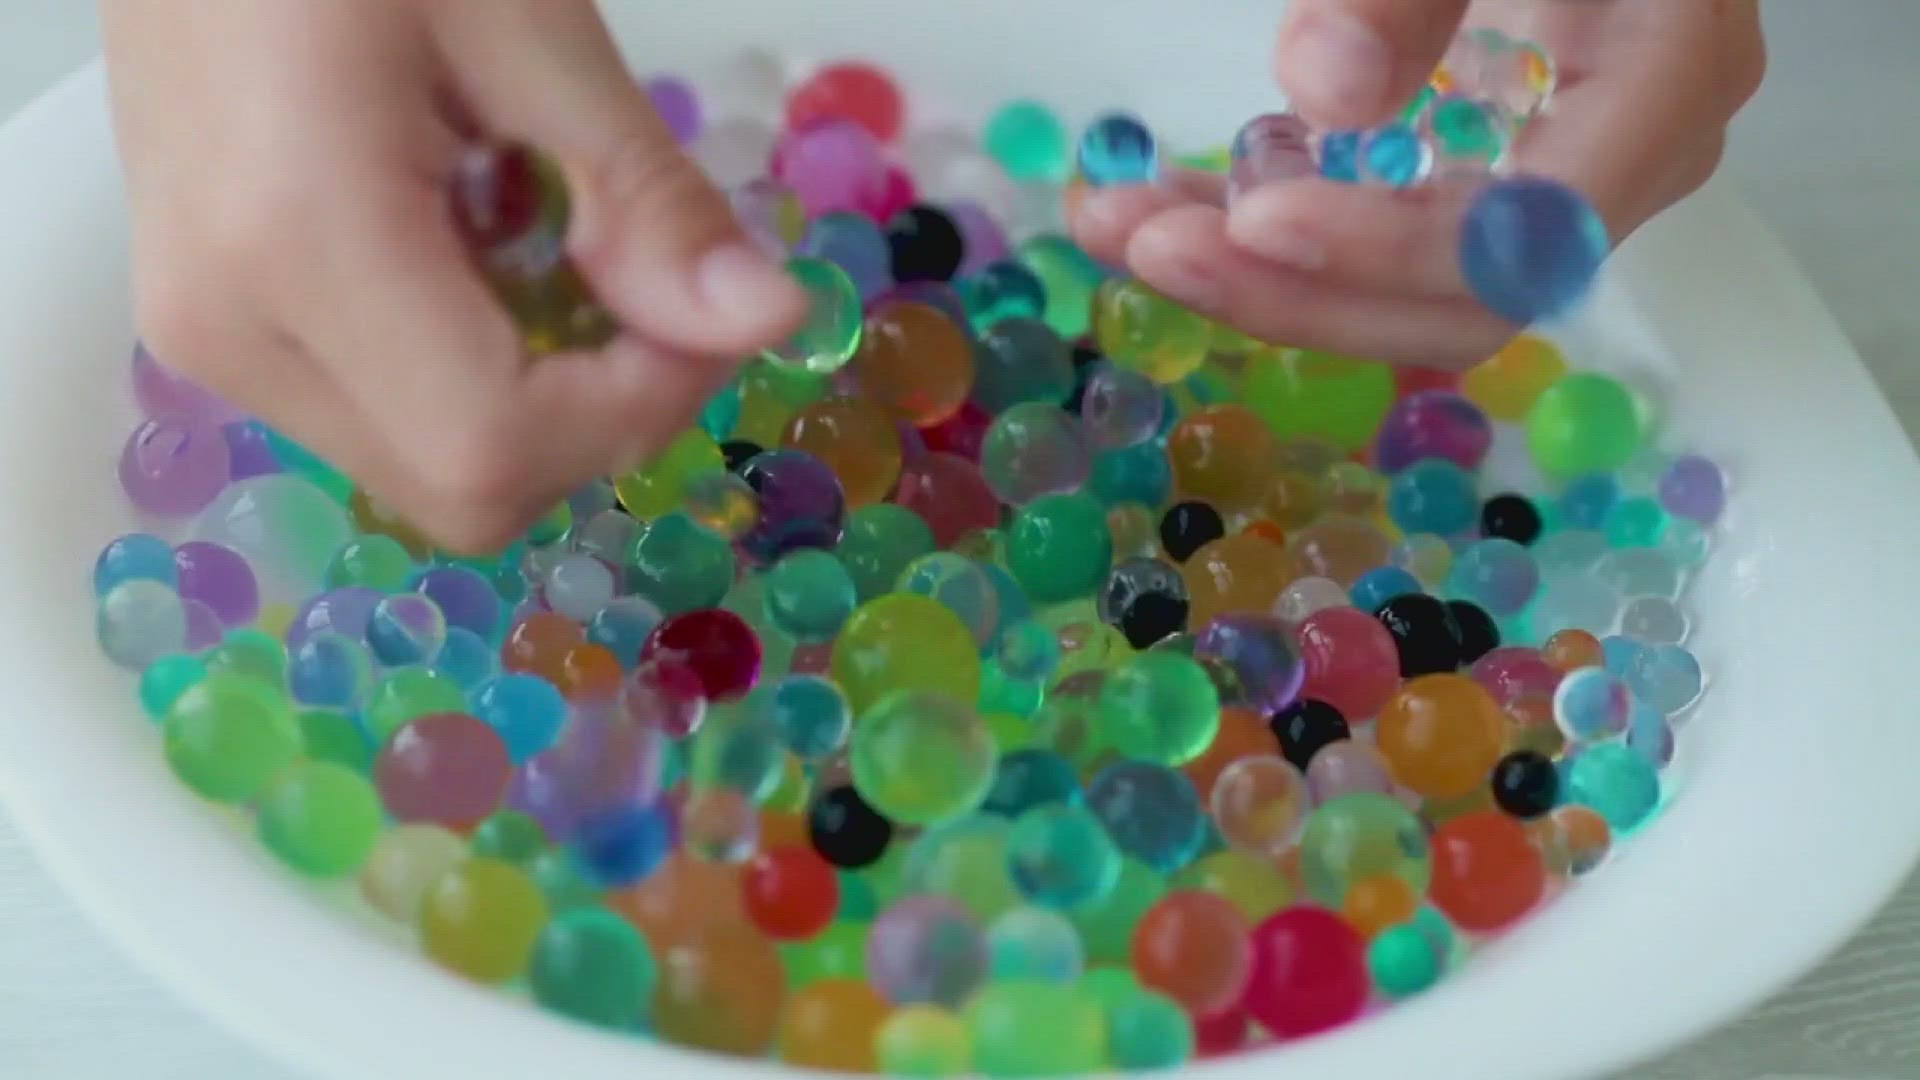 Some major retailers to stop selling Water Beads marketed to